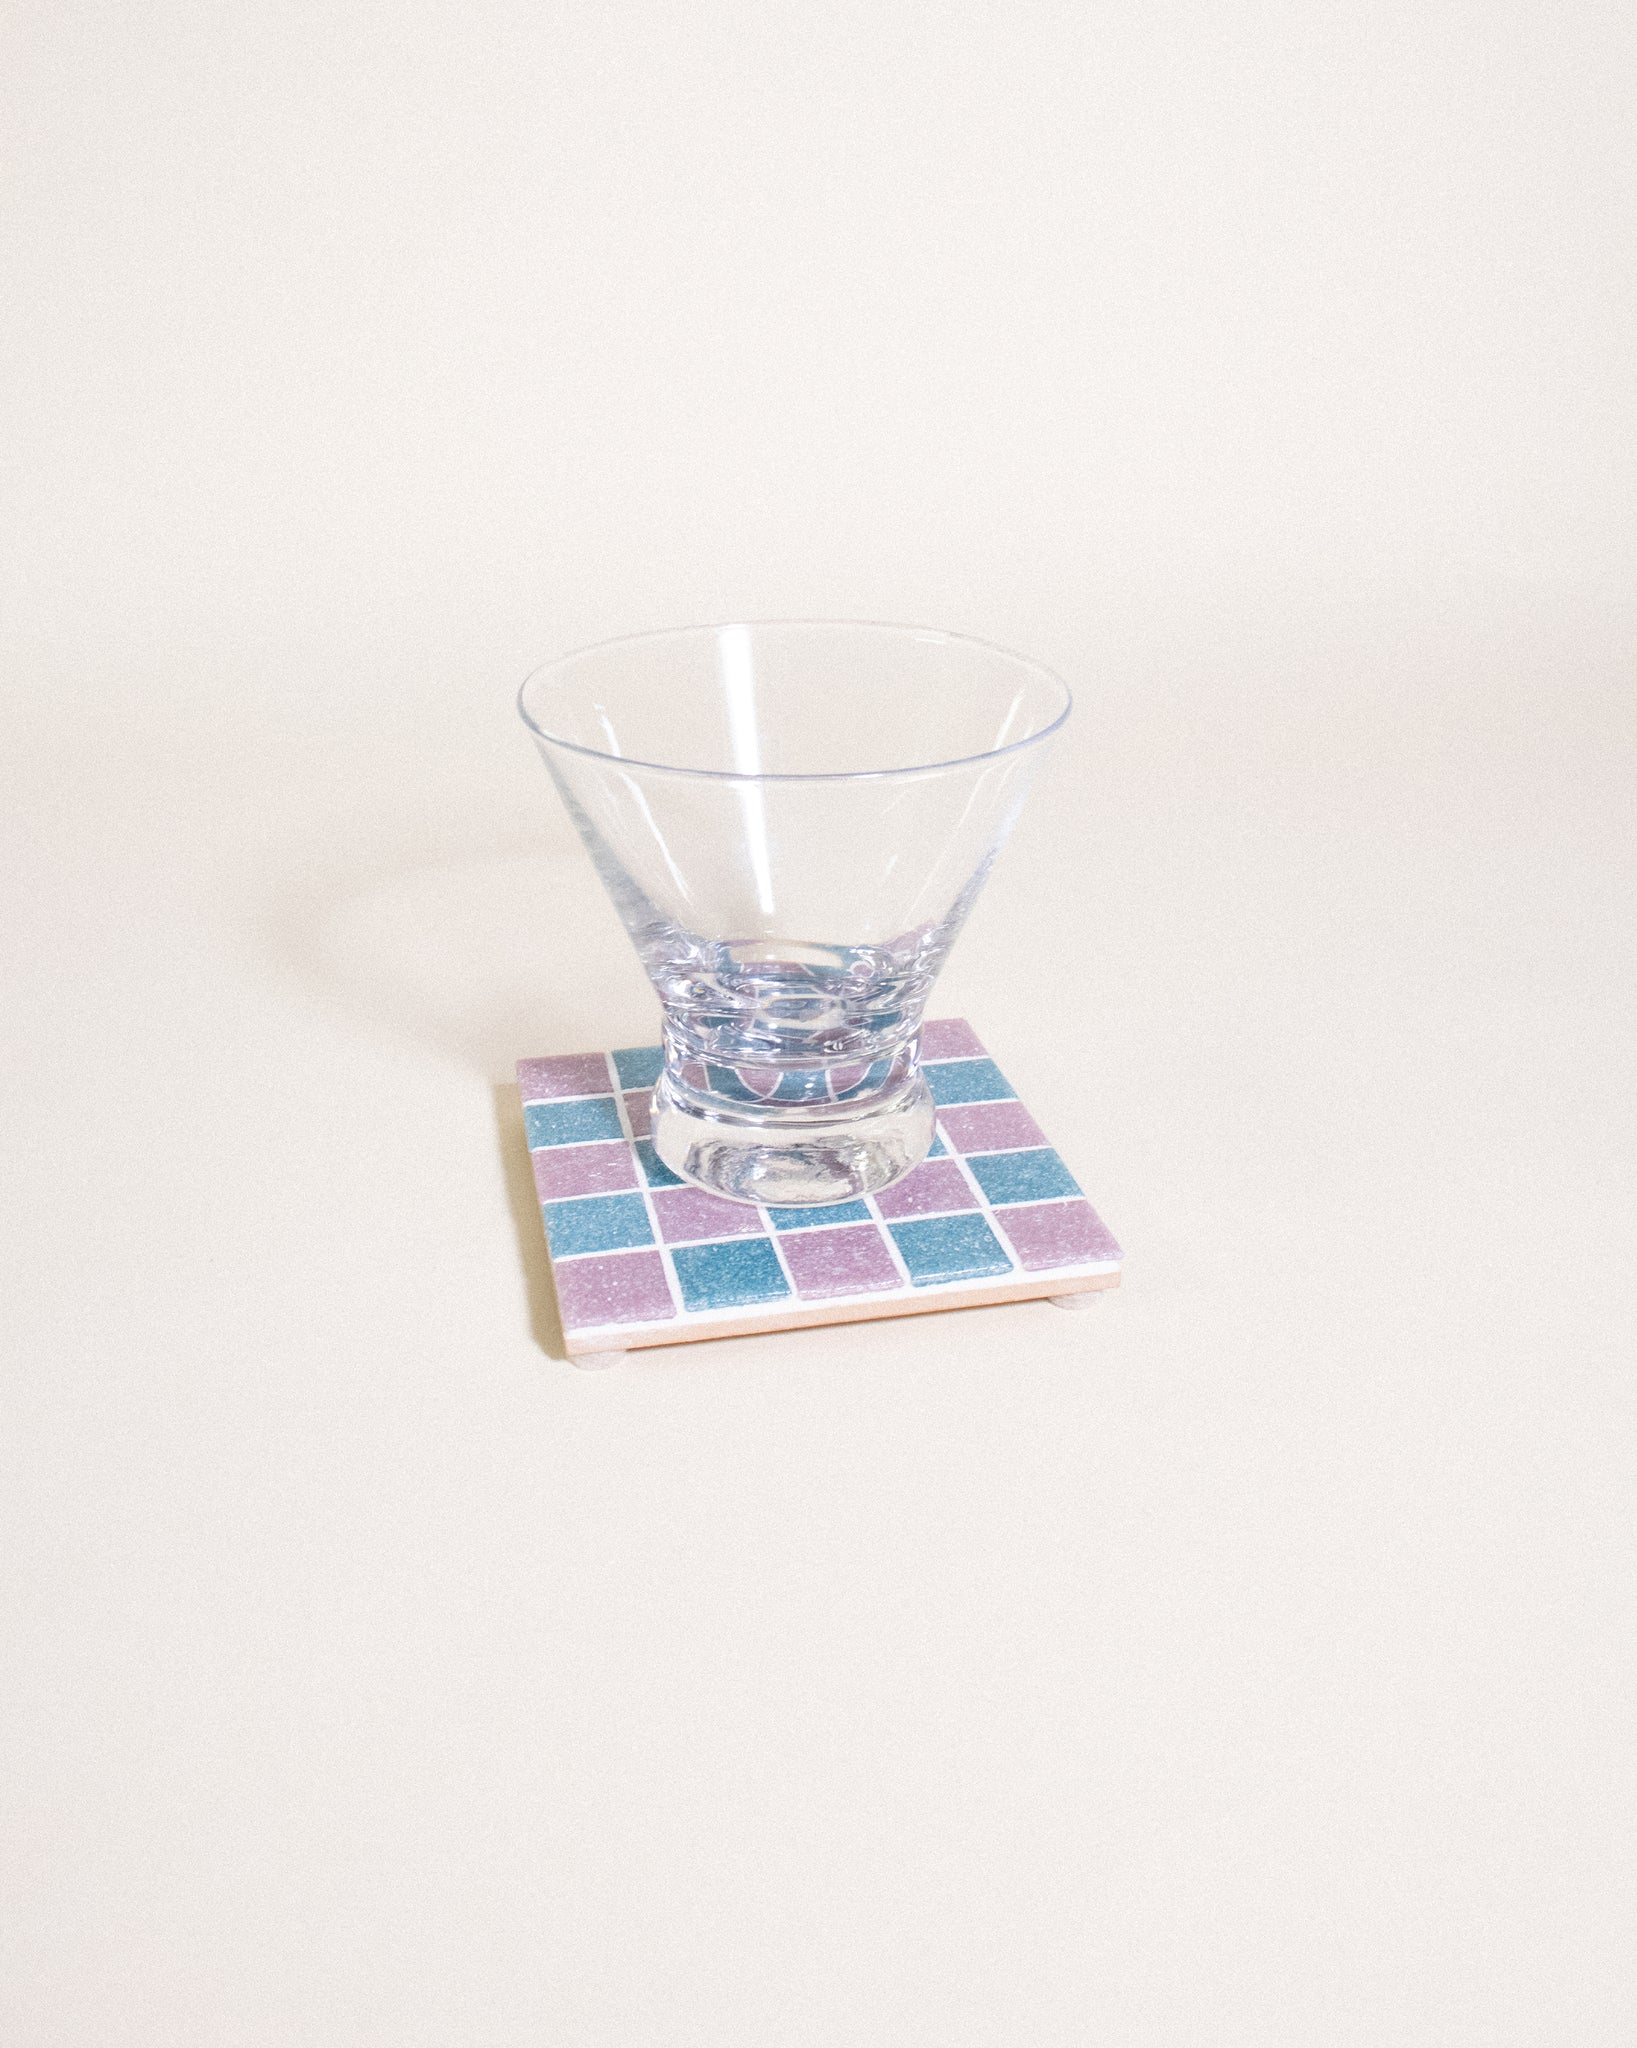 GLASS TILE COASTER - Sour Patch Candy - 10